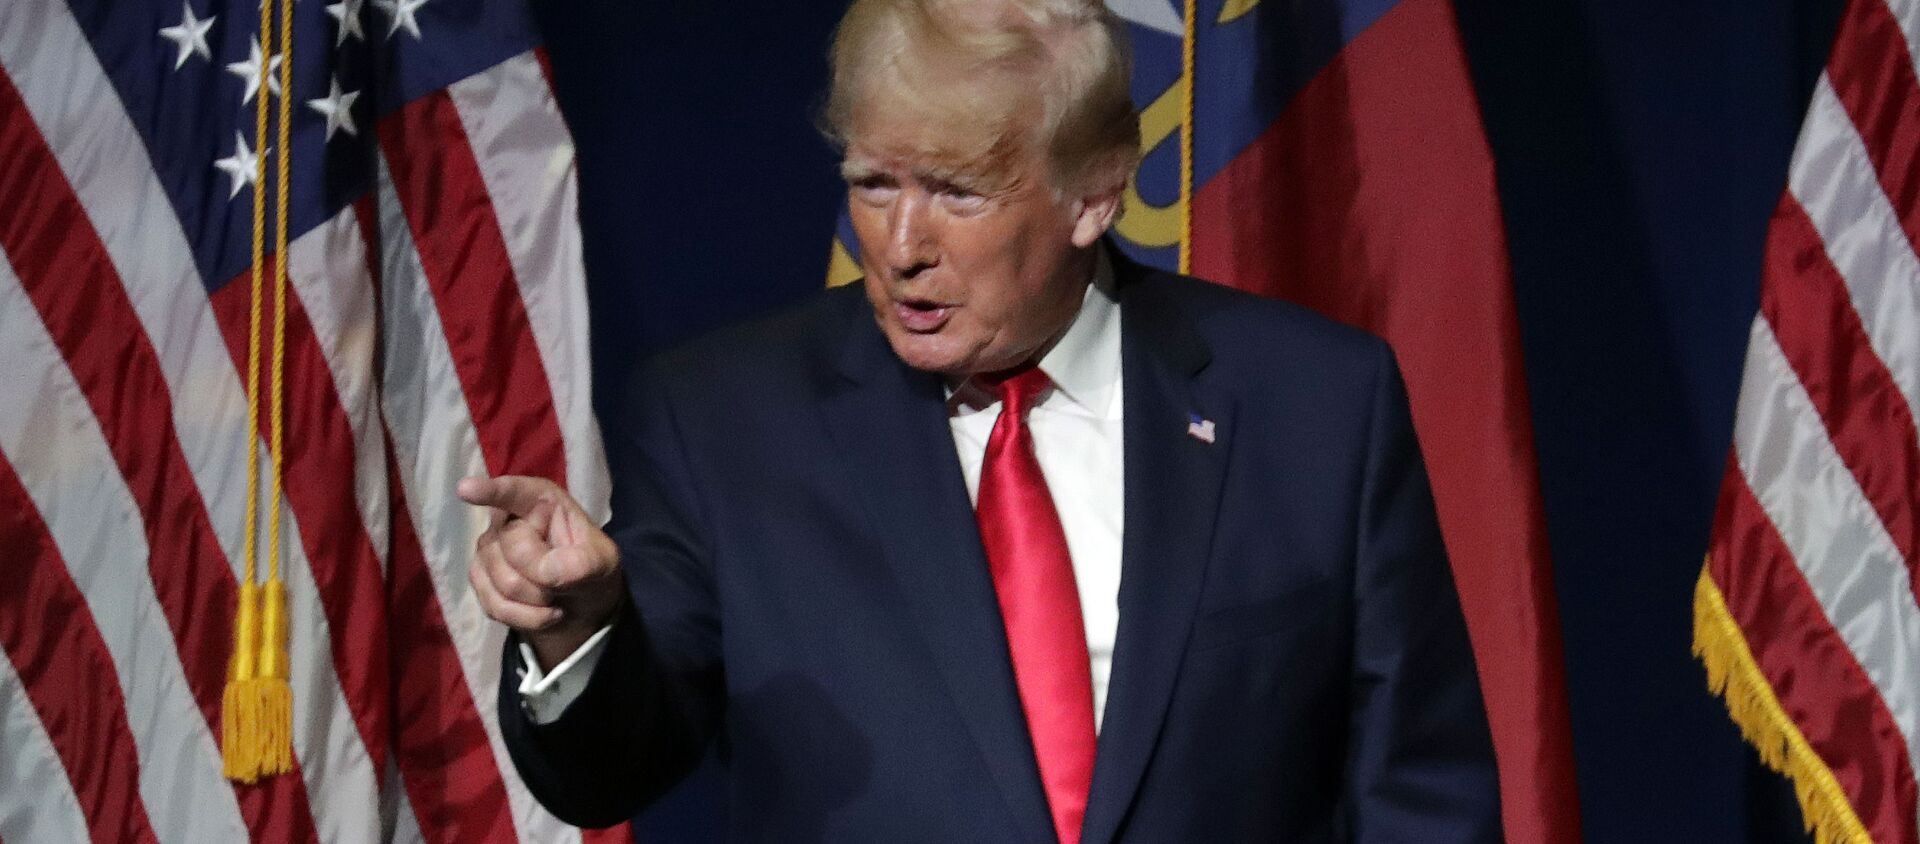 Former President Donald Trump acknowledges the crowd before he speaks at the North Carolina Republican Convention Saturday, June 5, 2021, in Greenville, N.C. - Sputnik International, 1920, 21.06.2021